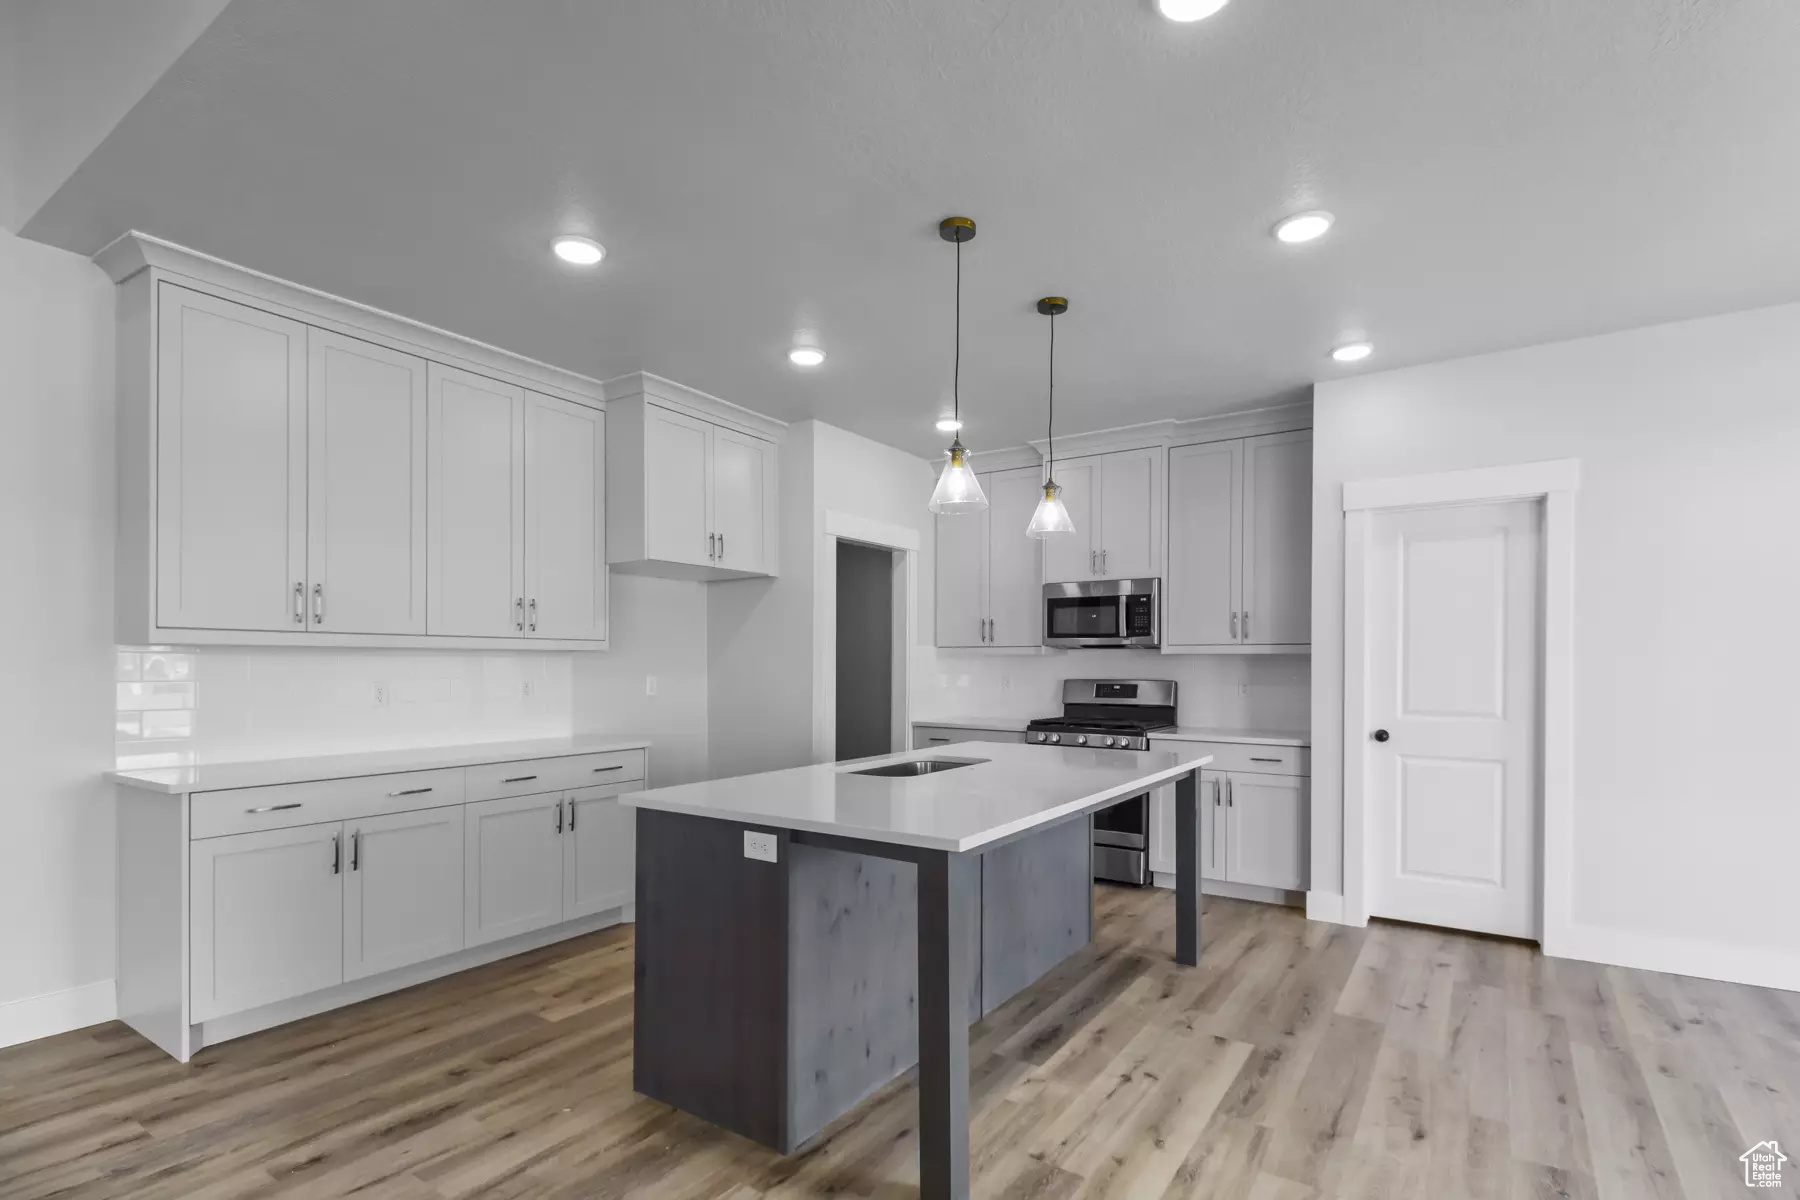 Kitchen featuring decorative light fixtures, appliances with stainless steel finishes, light hardwood / wood-style flooring, an island with sink, and a breakfast bar